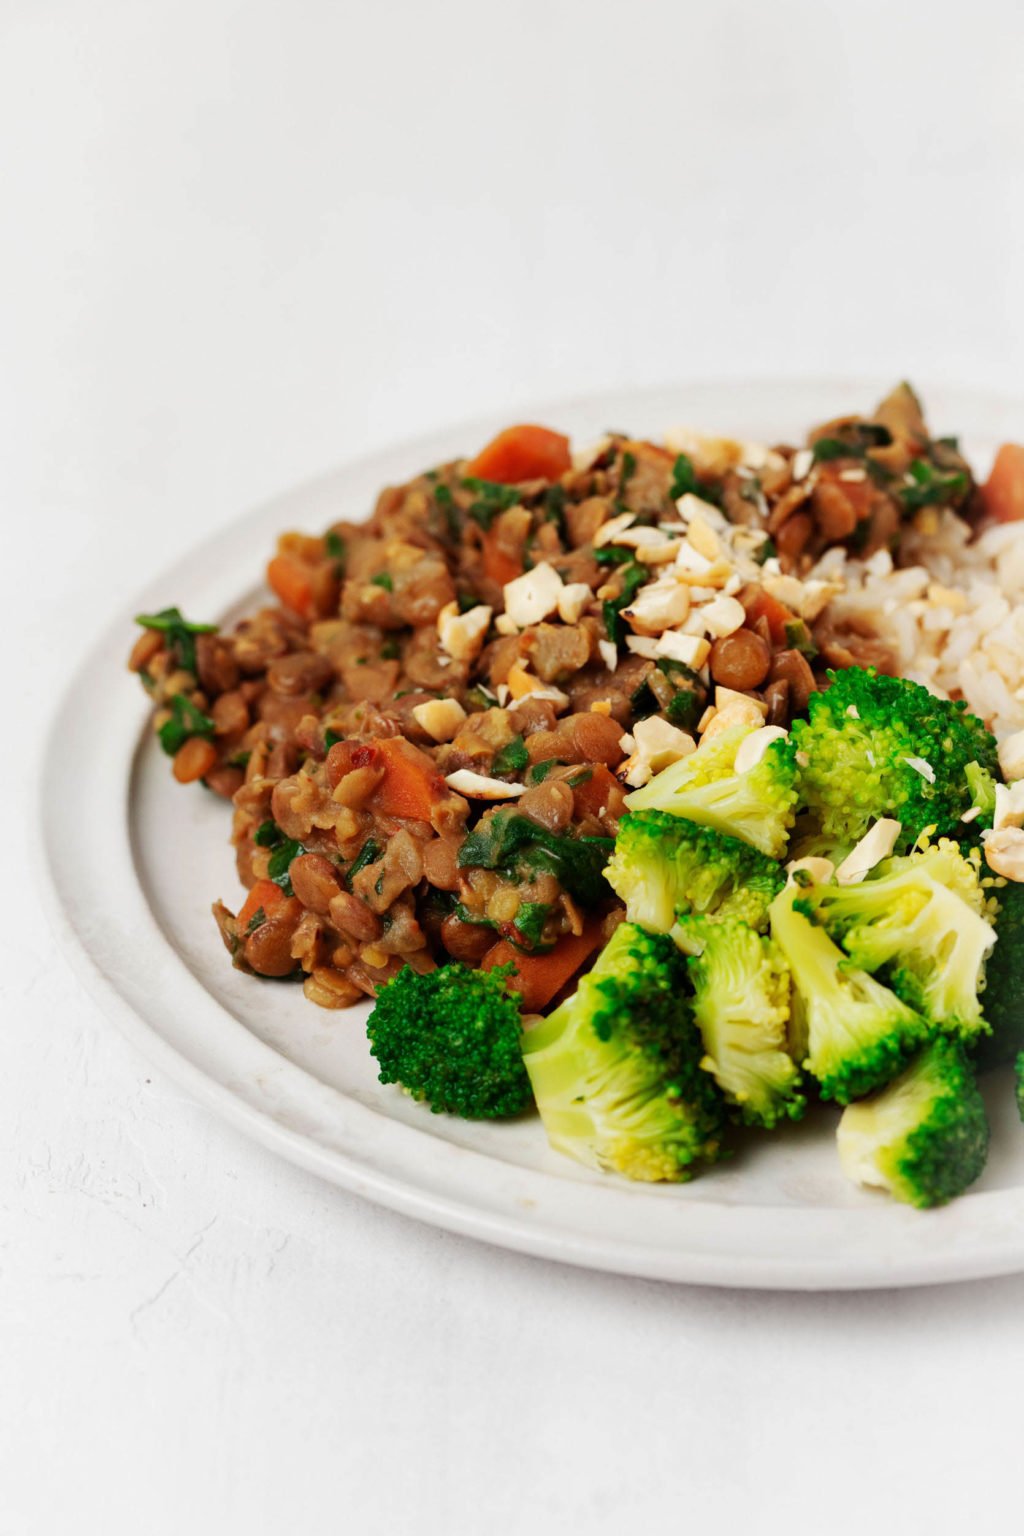 A white plate has been piled high with bright green broccoli, lentils, rice, and chopped nuts. It's resting on a white surface.